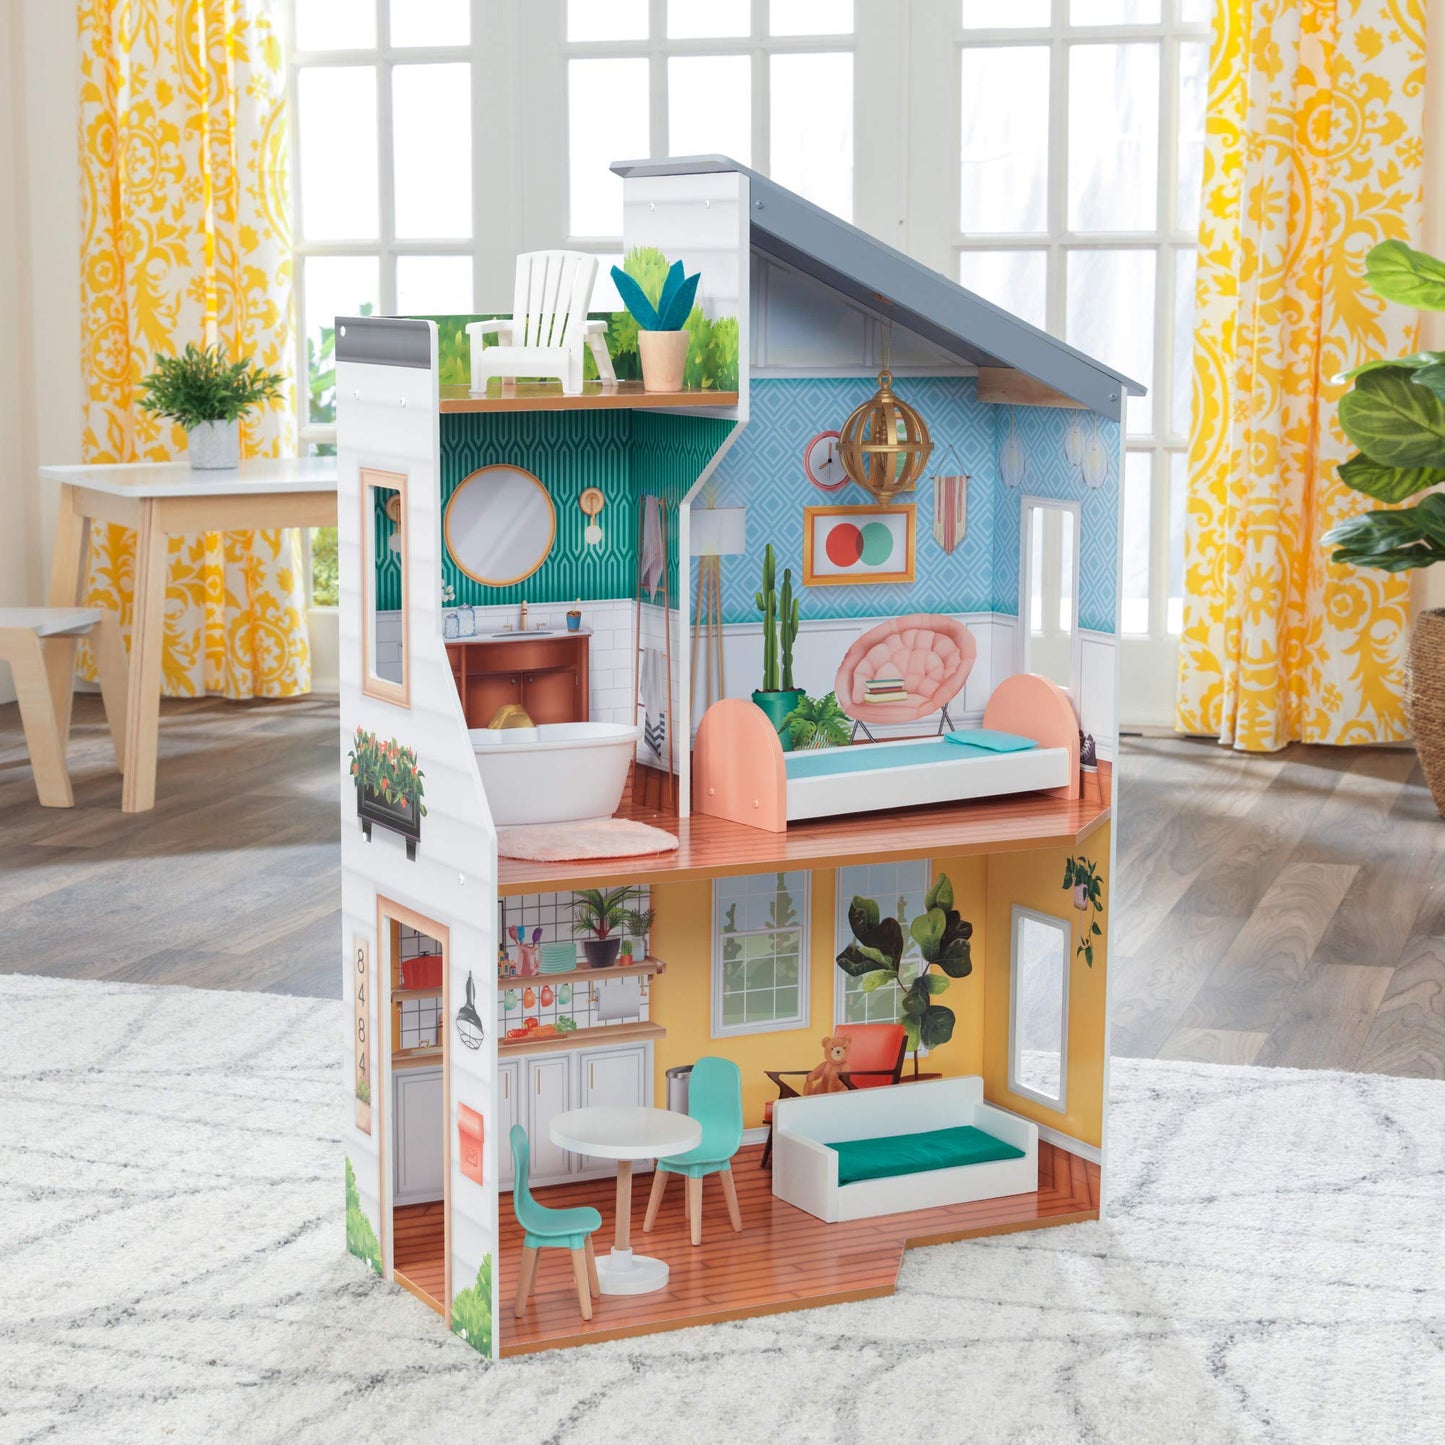 KidKraft Emily Wooden Dollhouse with 10 Accessories Included, for 12" Dolls, Gift for Ages 3+